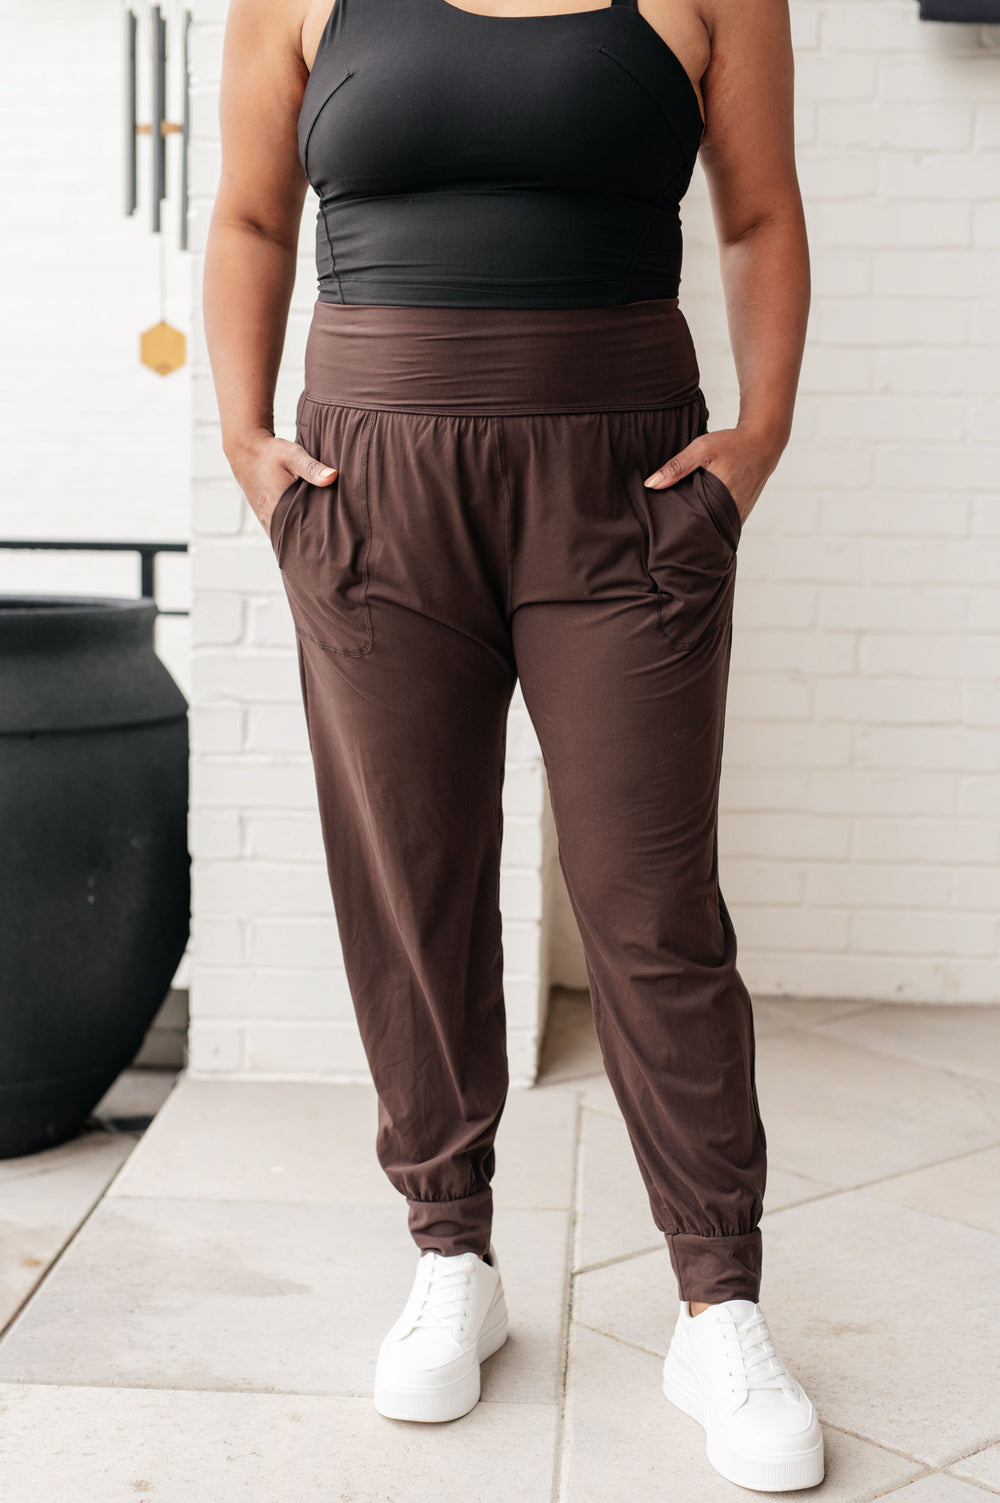 Always Accelerating Joggers in Espresso-Athleisure-Inspired by Justeen-Women's Clothing Boutique in Chicago, Illinois